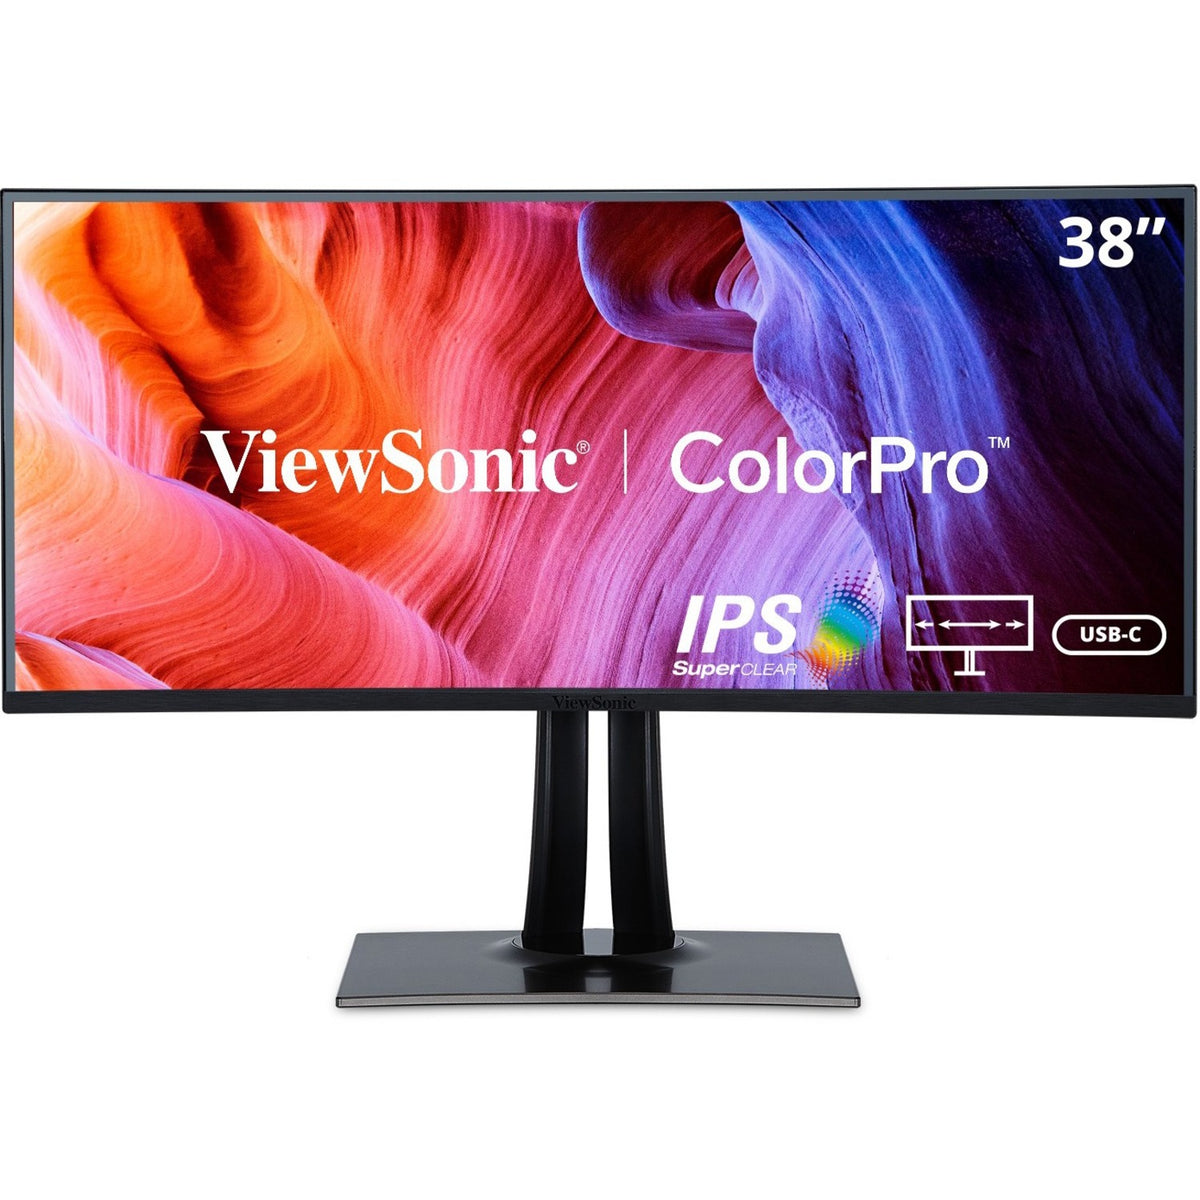 ViewSonic VP3881A 38-Inch IPS WQHD+ Curved Ultrawide Monitor with ColorPro 100% sRGB Rec 709, Eye Care, HDR10 Support, USB C, HDMI, USB, DisplayPort for Professional Home and Office - VP3881a